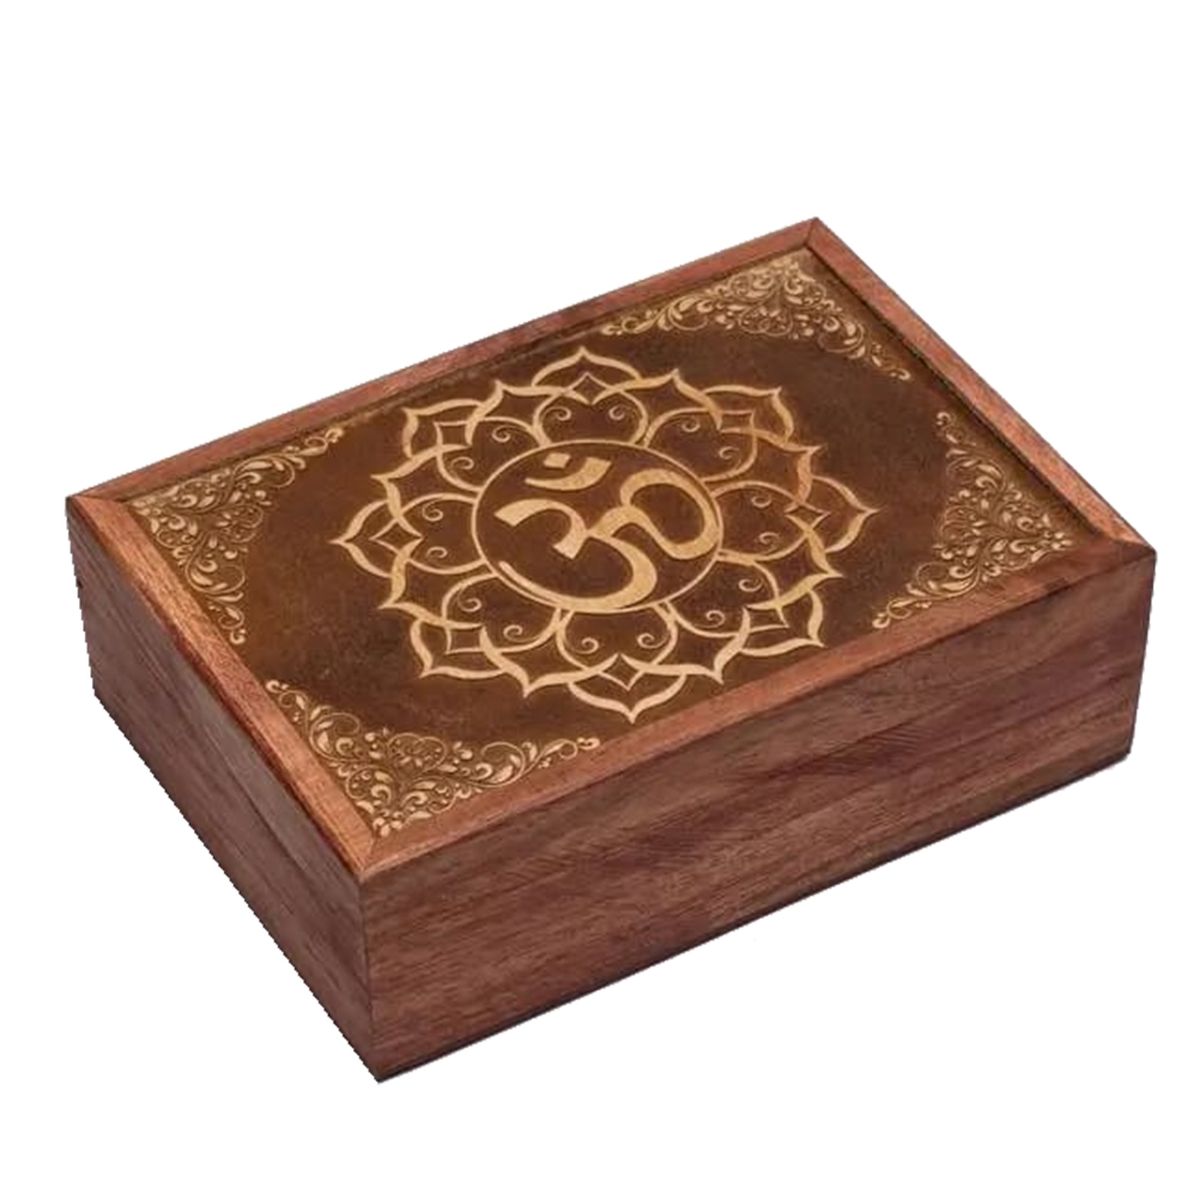 OM small box carved